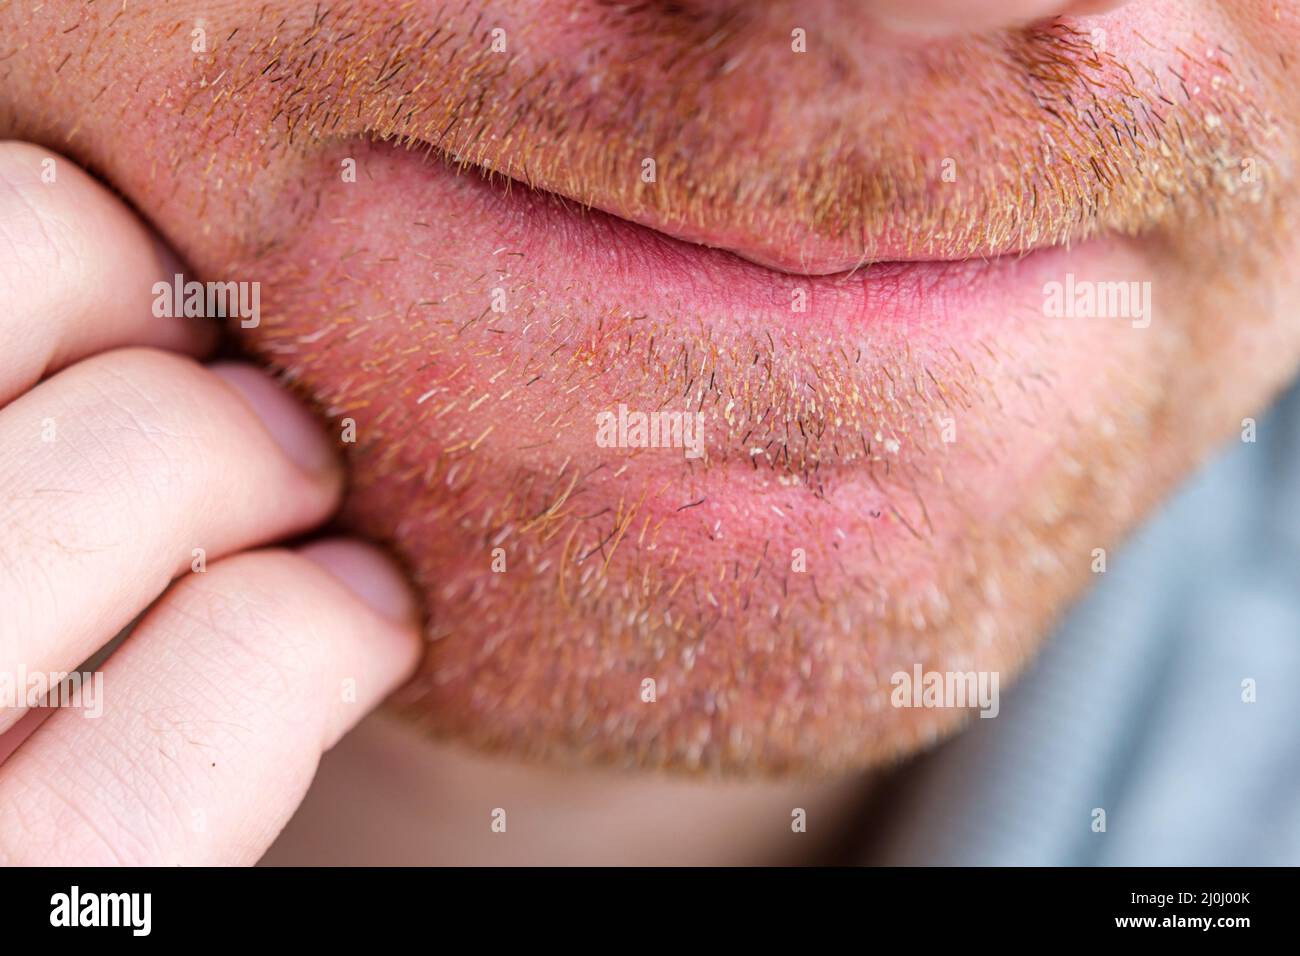 Man scratching his face. Seborrheic dermatitis or eczema on adult man face isolated close up. Stock Photo